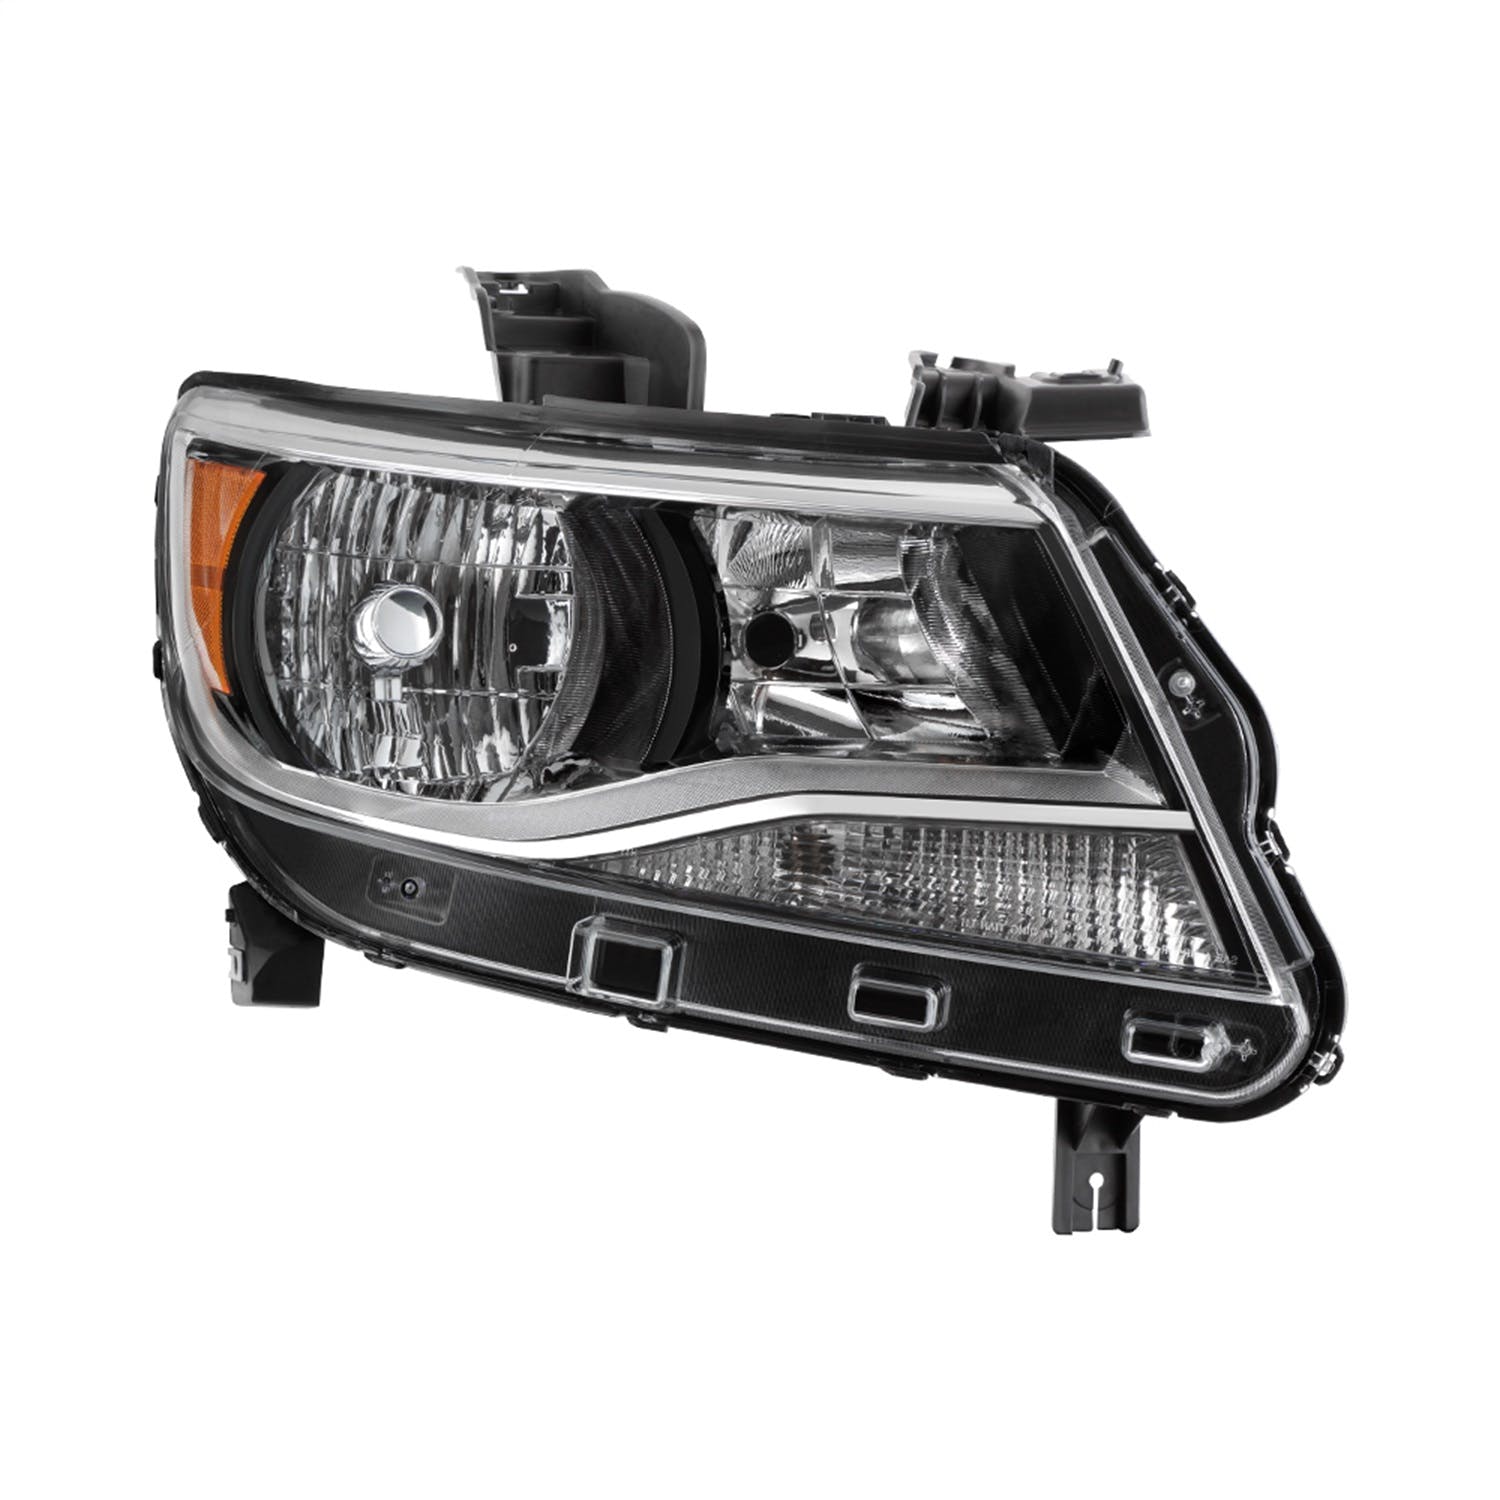 XTUNE POWER 9040542 Chevy Colorado 2015 2021 Halogen Models Only ( Does Not fit Xenon HID and Projector Models ) Passenger Side Headlight Low Beam H11(Included) ; High Beam 9005(Included) ; Signal 7444NA(Not Included) OEM Right